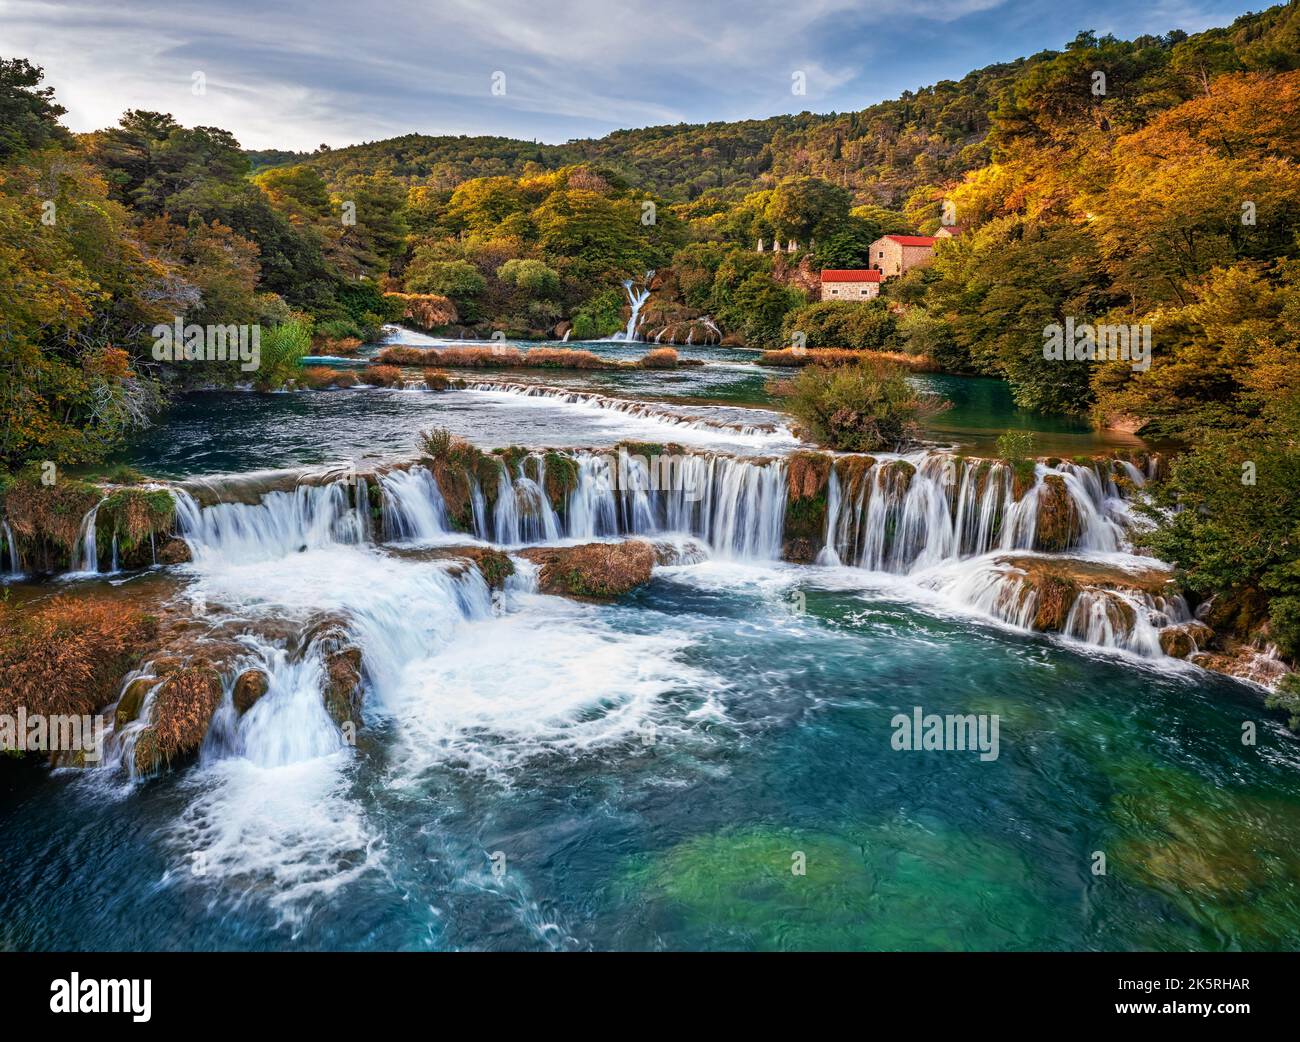 Krka, Croatia - Aerial view of the famous Krka Waterfalls in Krka National Park on a bright autumn morning with colorful autumn foliage, turquoise wat Stock Photo